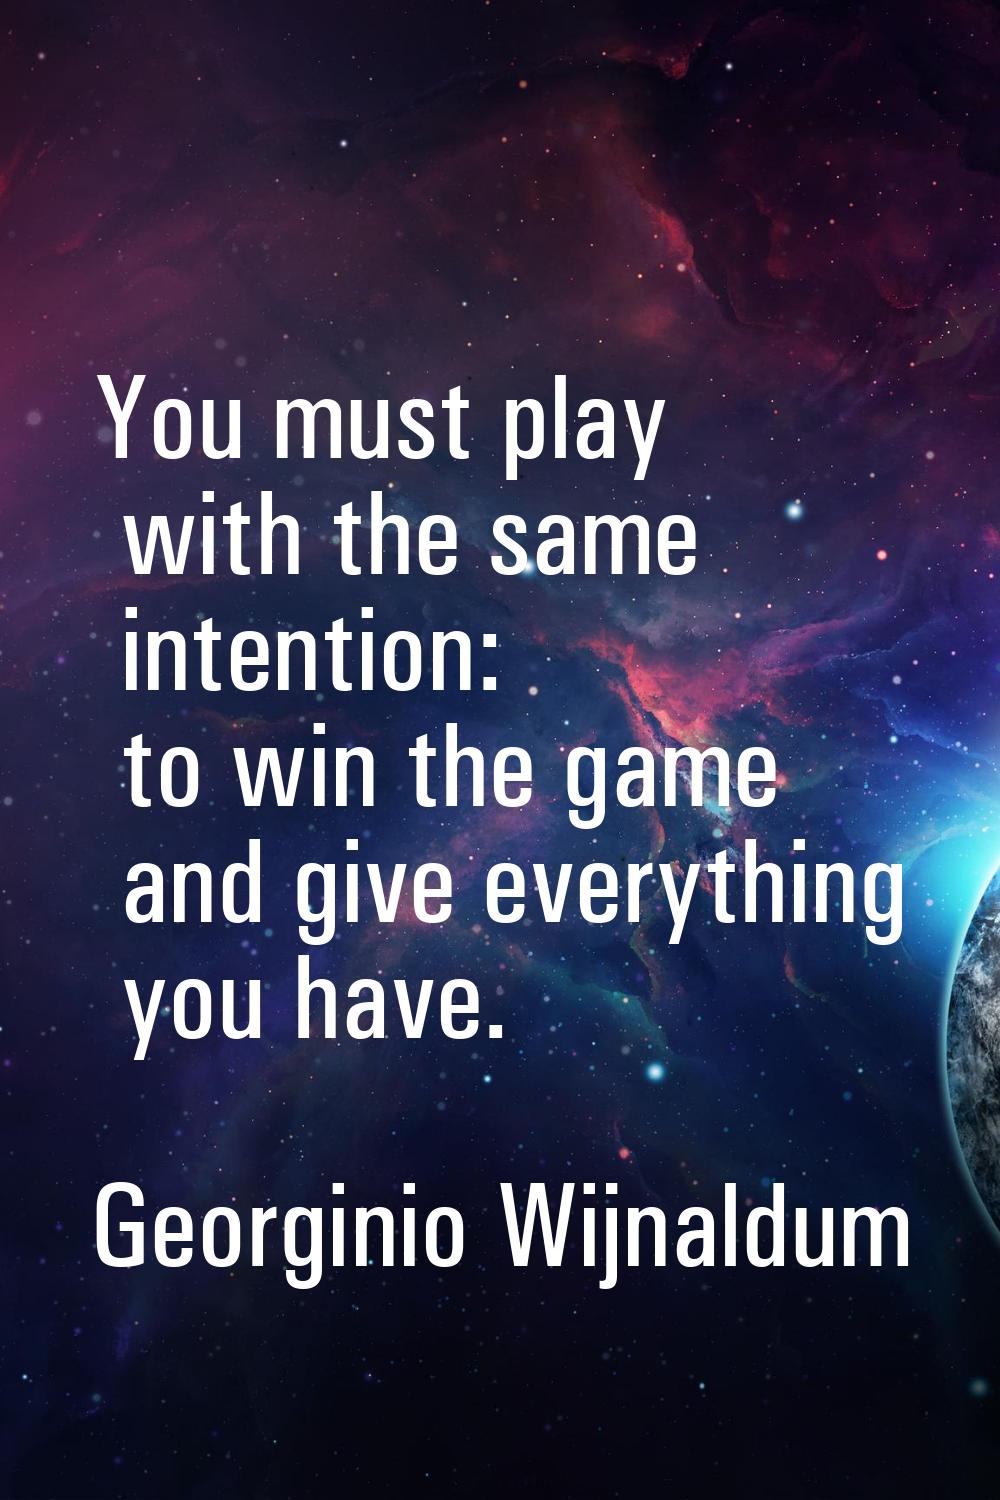 You must play with the same intention: to win the game and give everything you have.